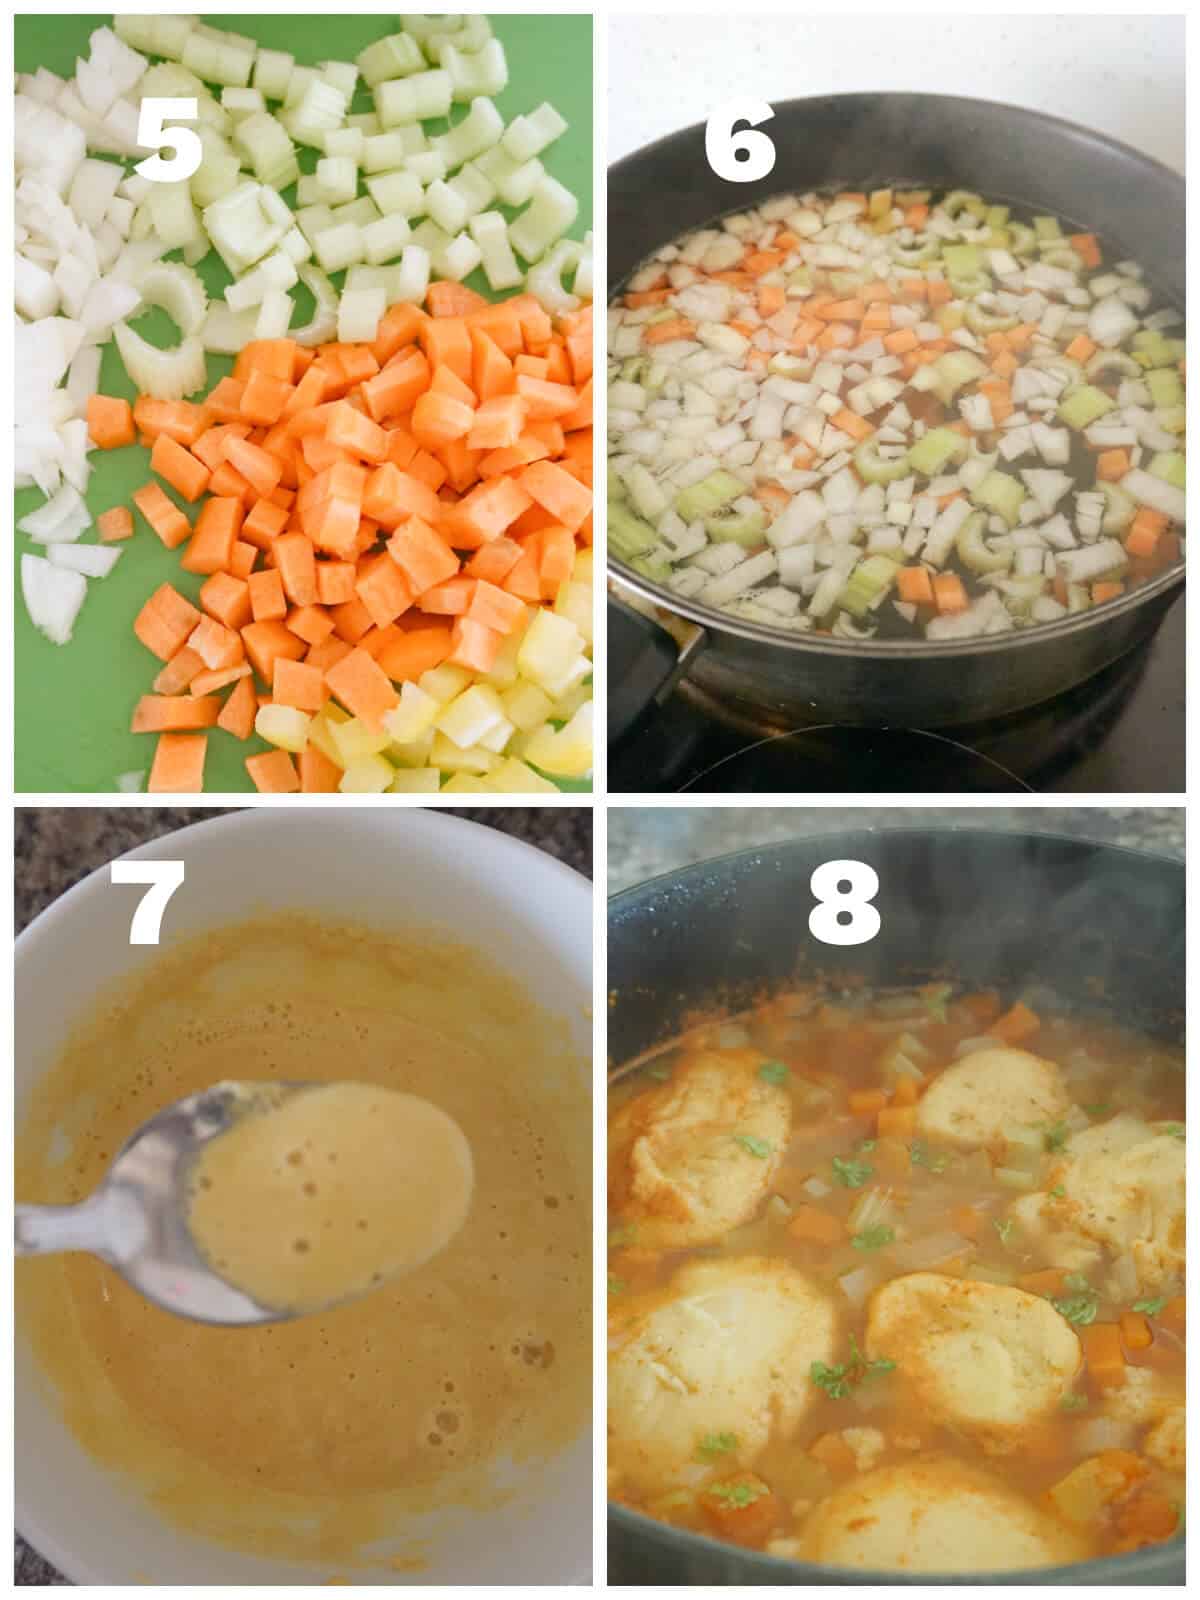 Collage of 4 photos to show how to make semolina dumpling soup.